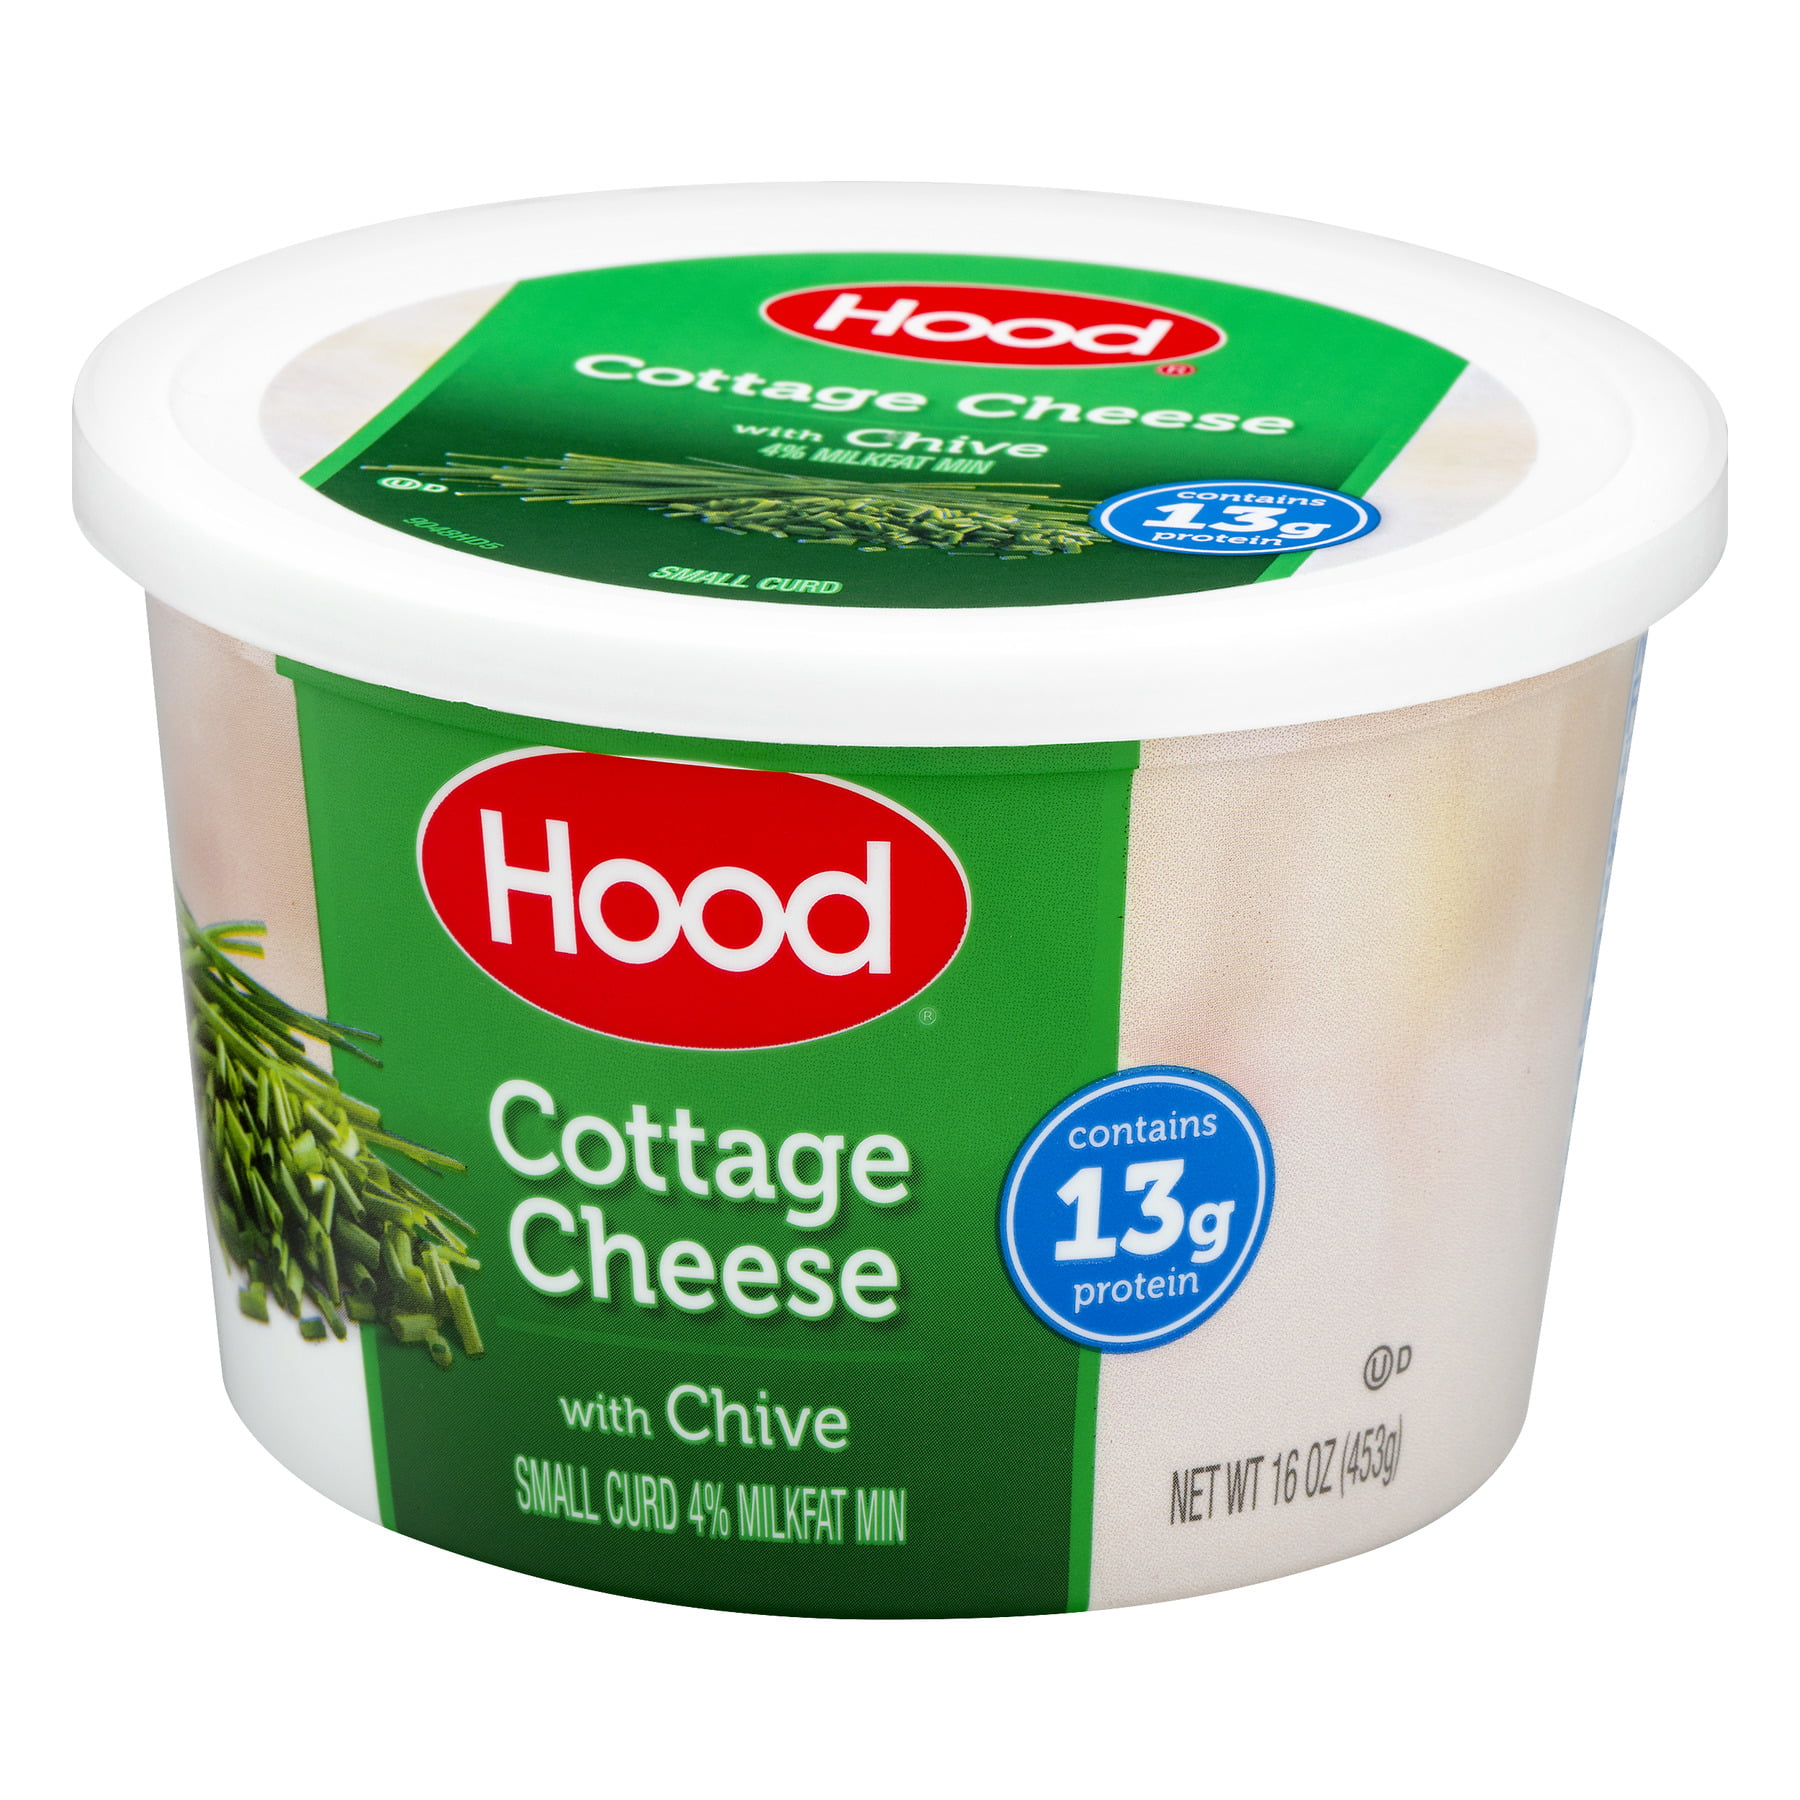 Hood Cottage Cheese Small Curd With Chive 16 Oz Walmart Com